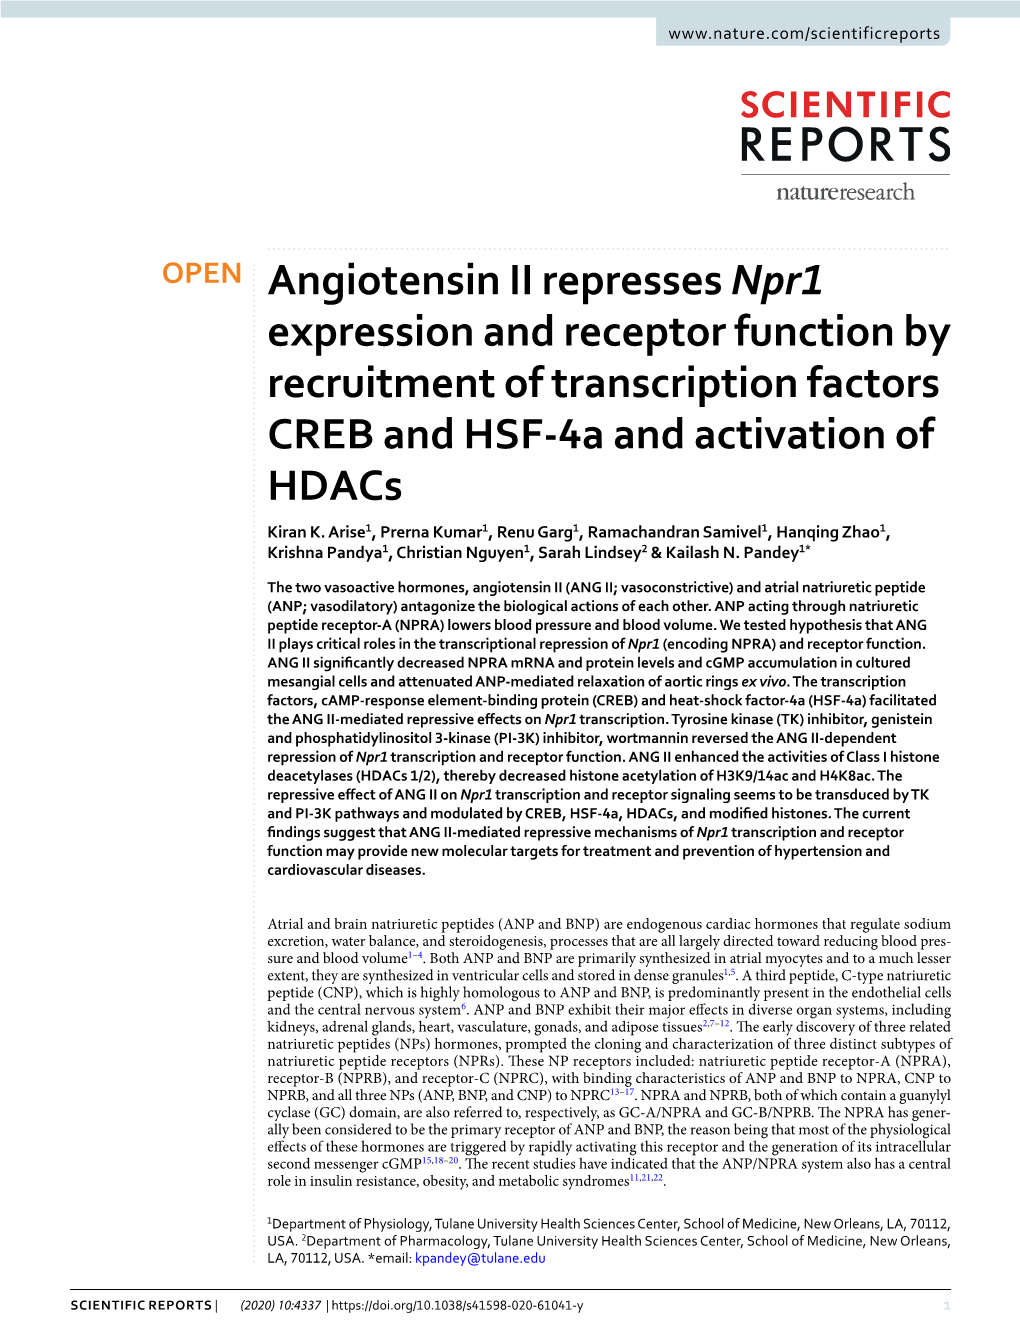 Angiotensin II Represses Npr1 Expression and Receptor Function by Recruitment of Transcription Factors CREB and HSF-4A and Activation of Hdacs Kiran K